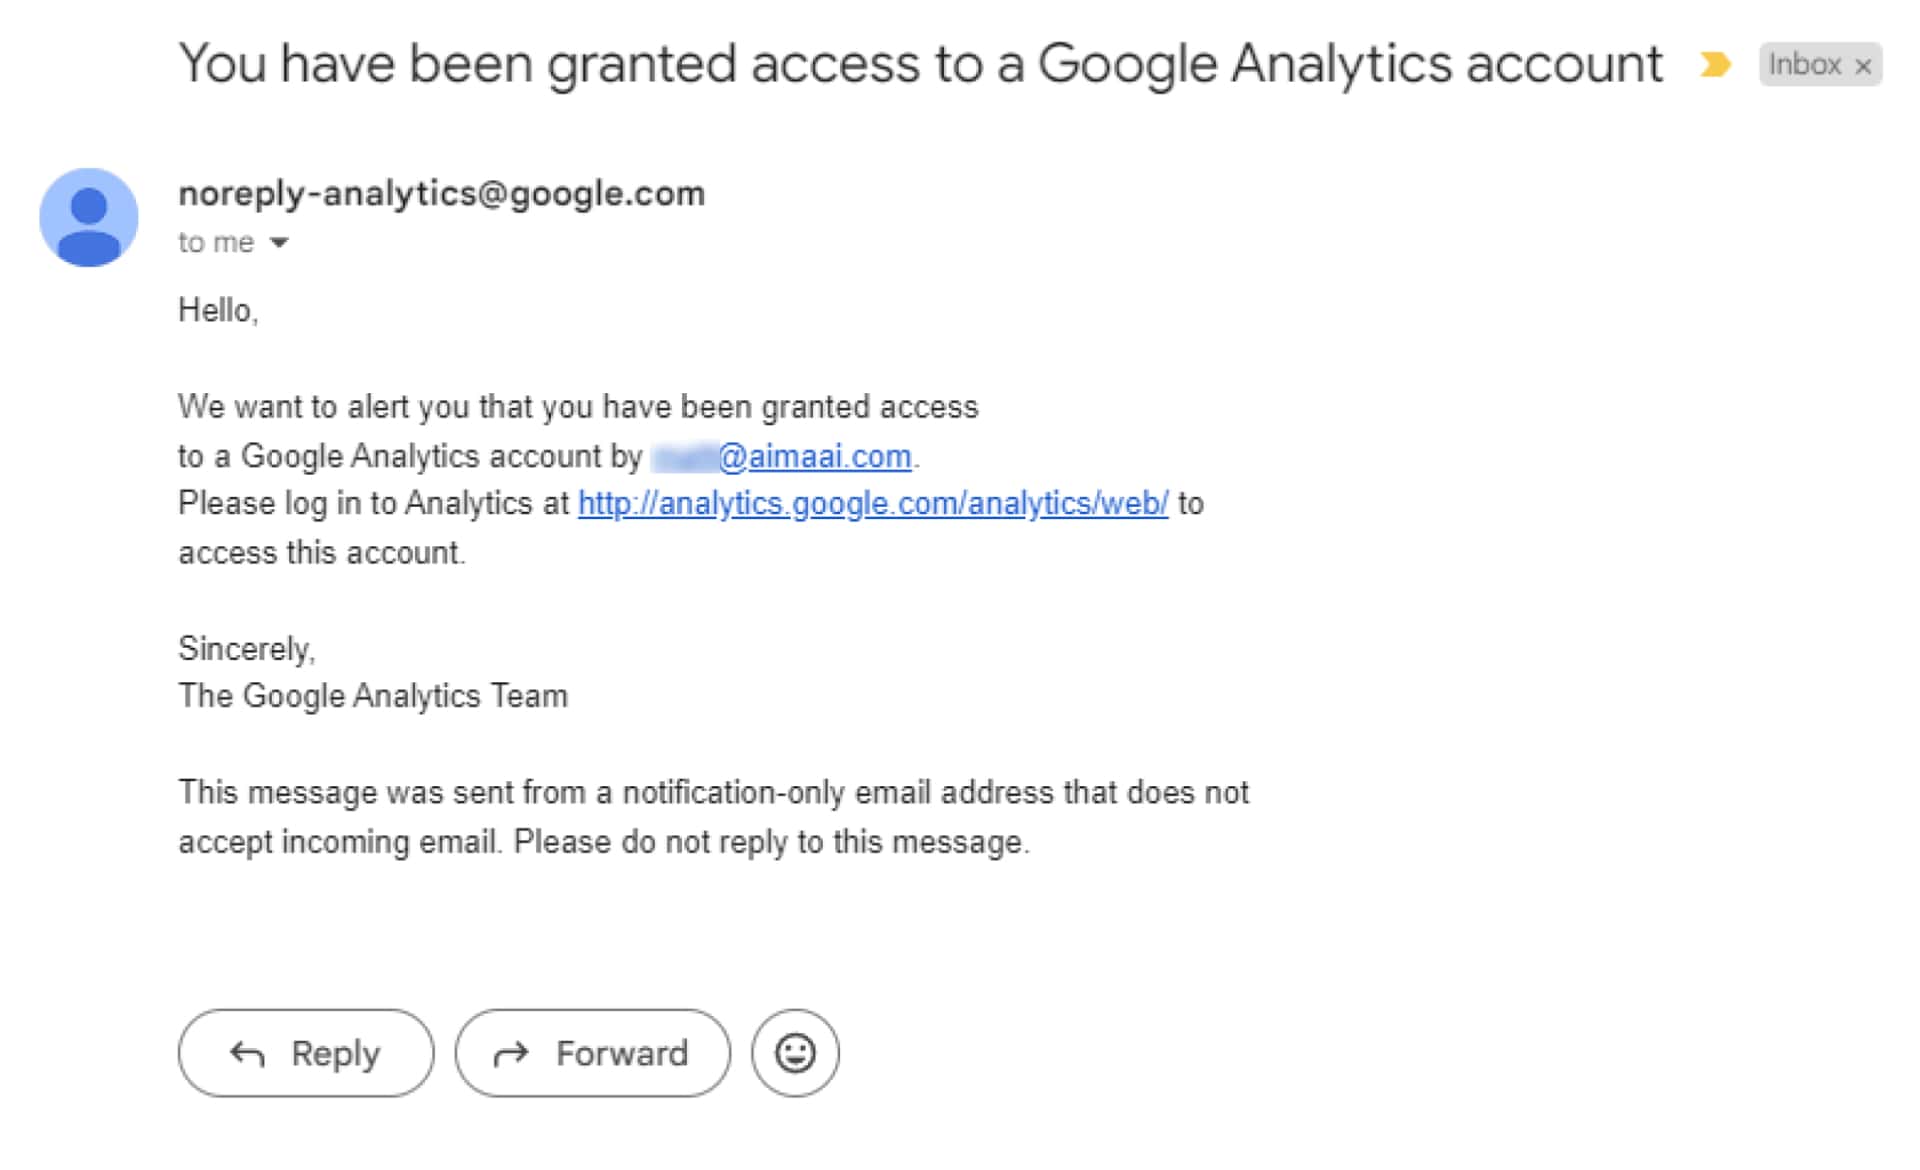 Email notification regarding access to a google analytics account.